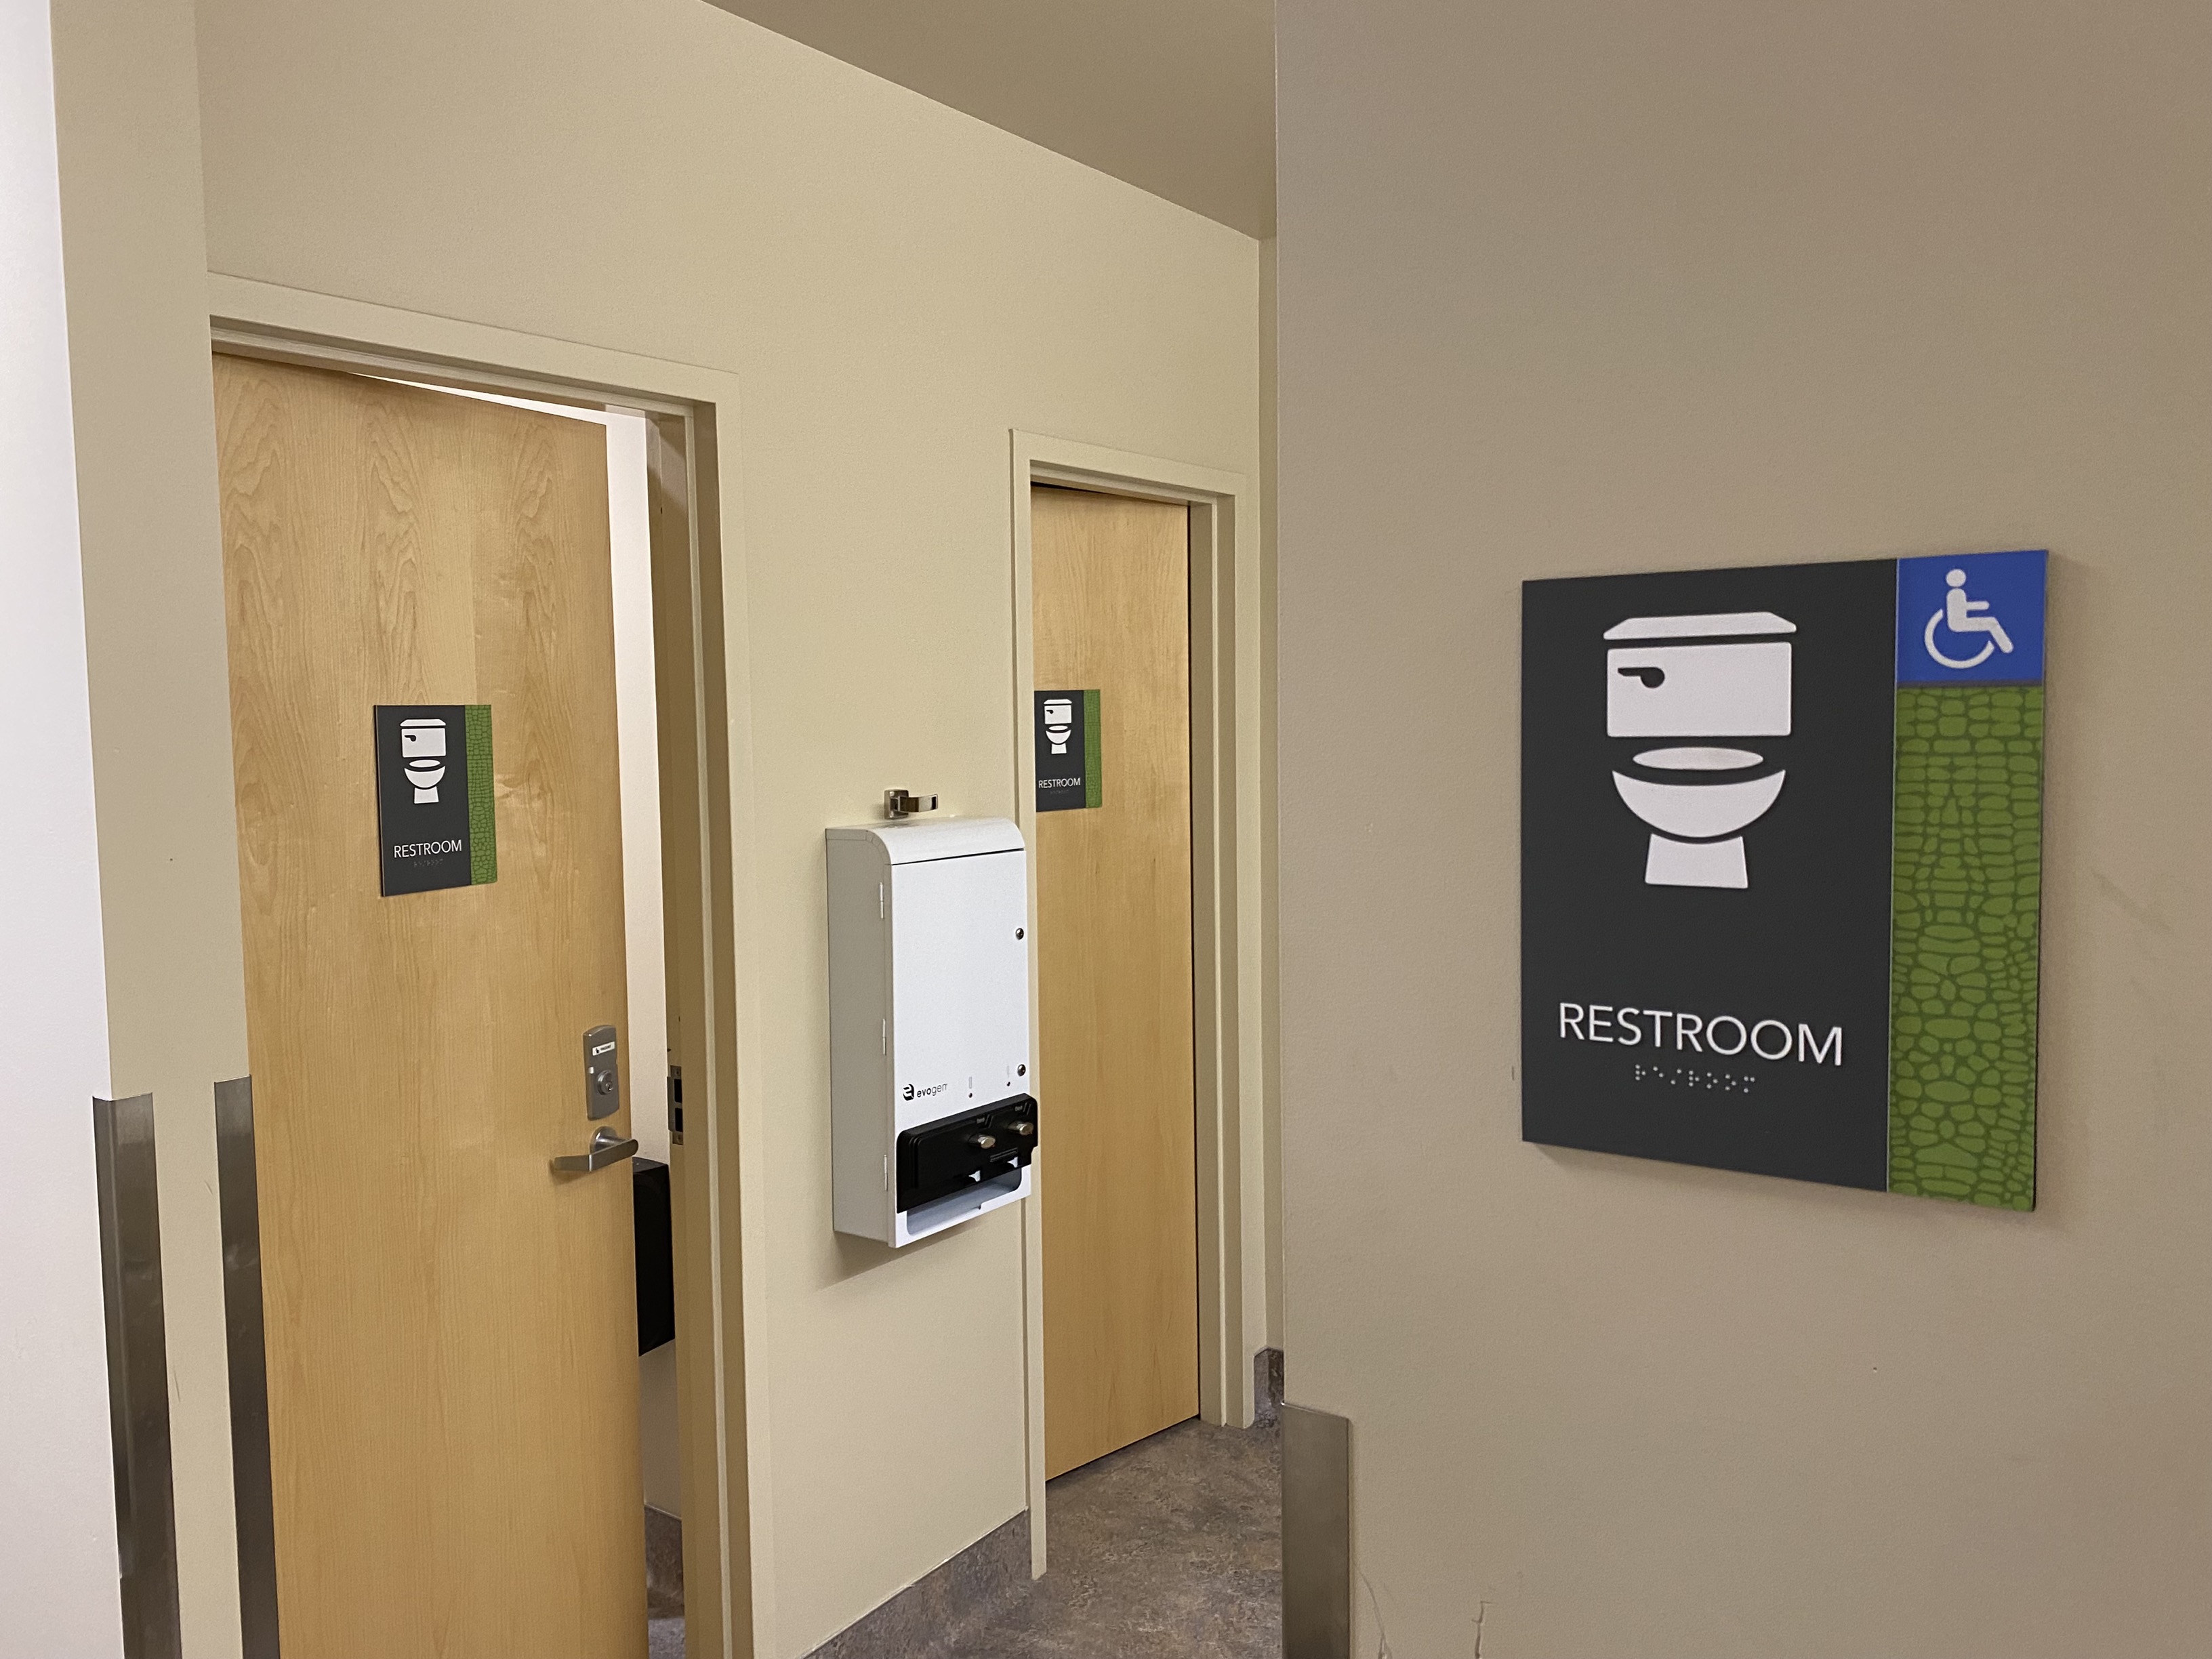 New signage in the West Building in indicating a single-stall gender-neutral restrooms